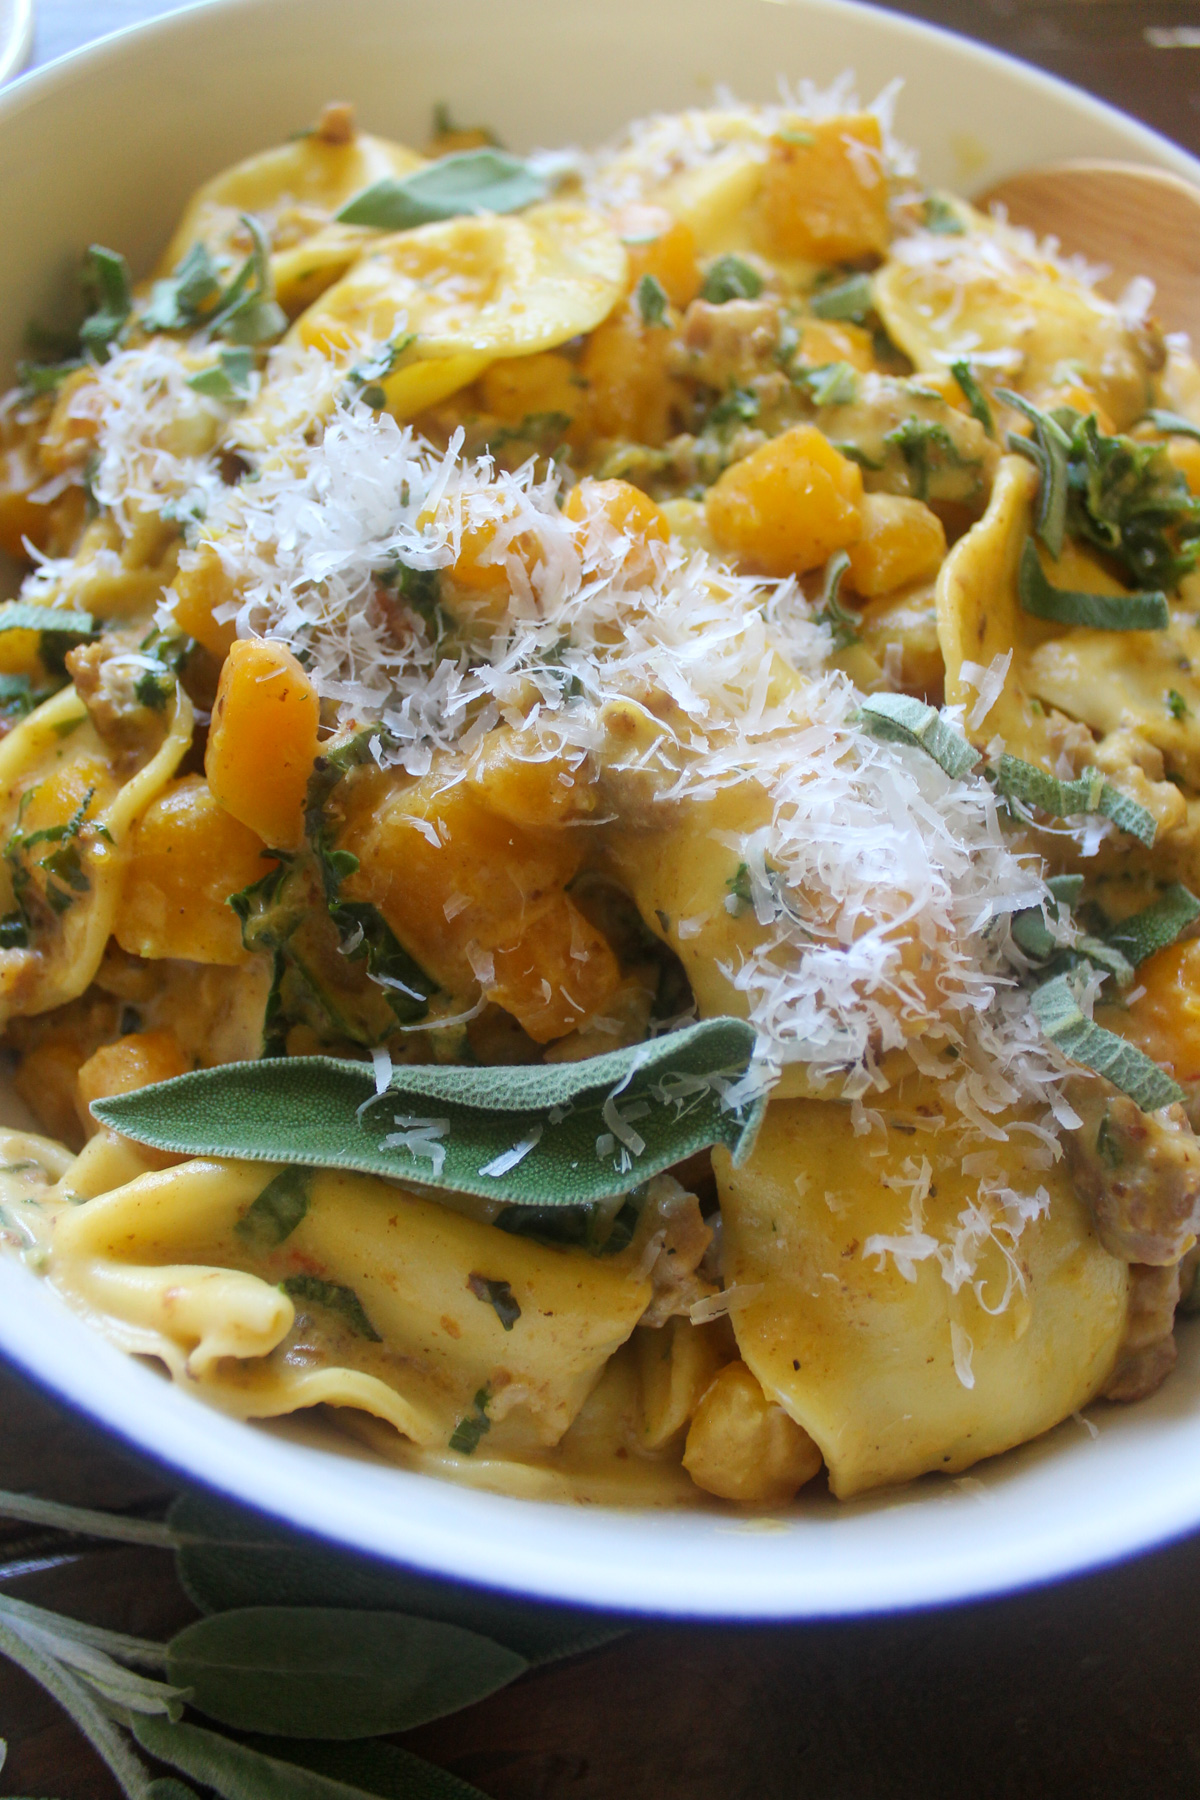 Butternut squash cream sauce with ravioli, sage and Parmesan cheese.